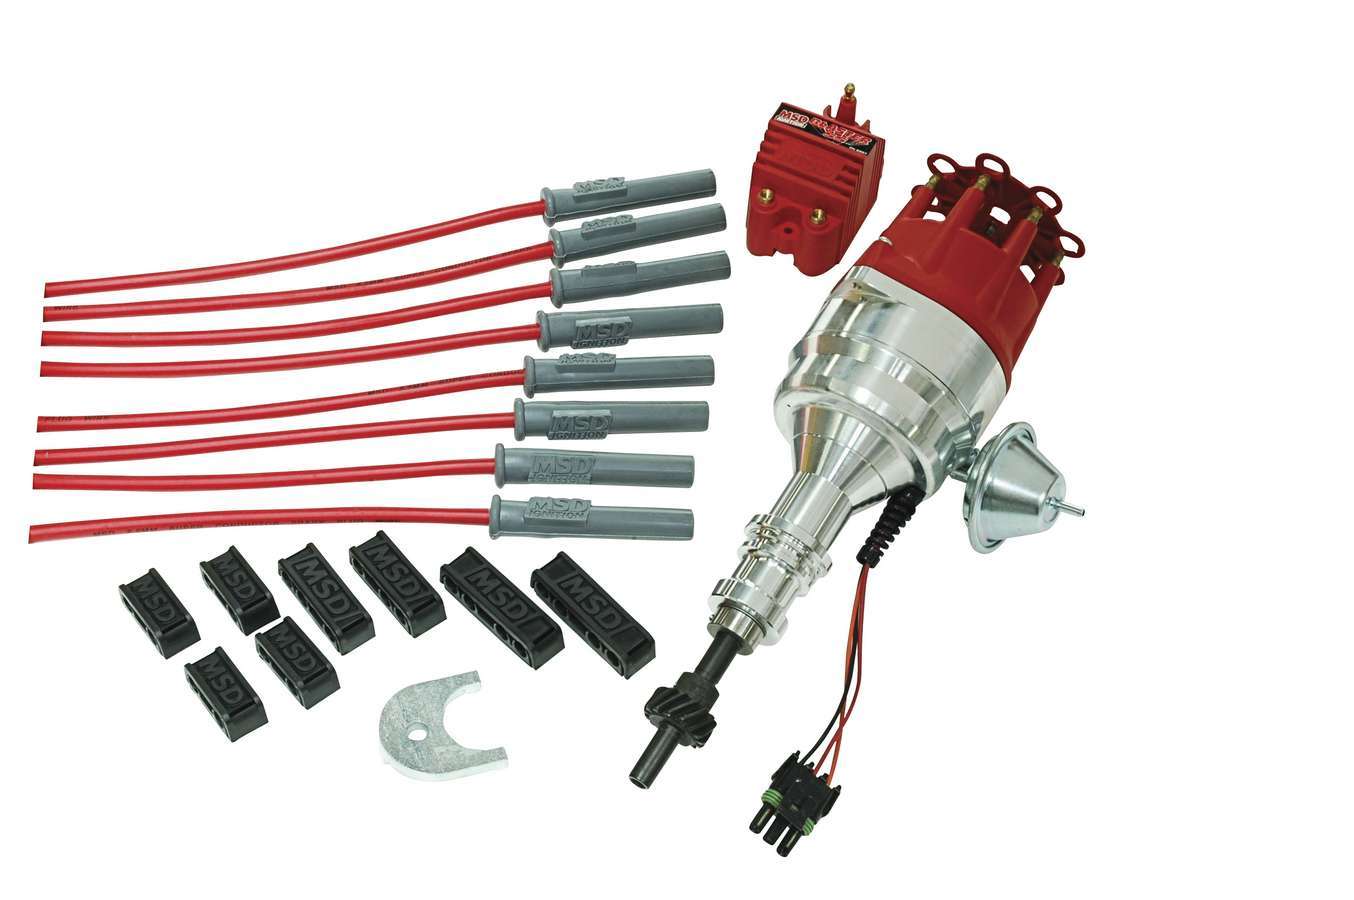 MSD Ignition 84746 Ignition Kit, Crate Ignition Kits, Distributor, Blaster SS Coil, Super Conductor Wires, Wire Dividers, Small Block Ford, Kit